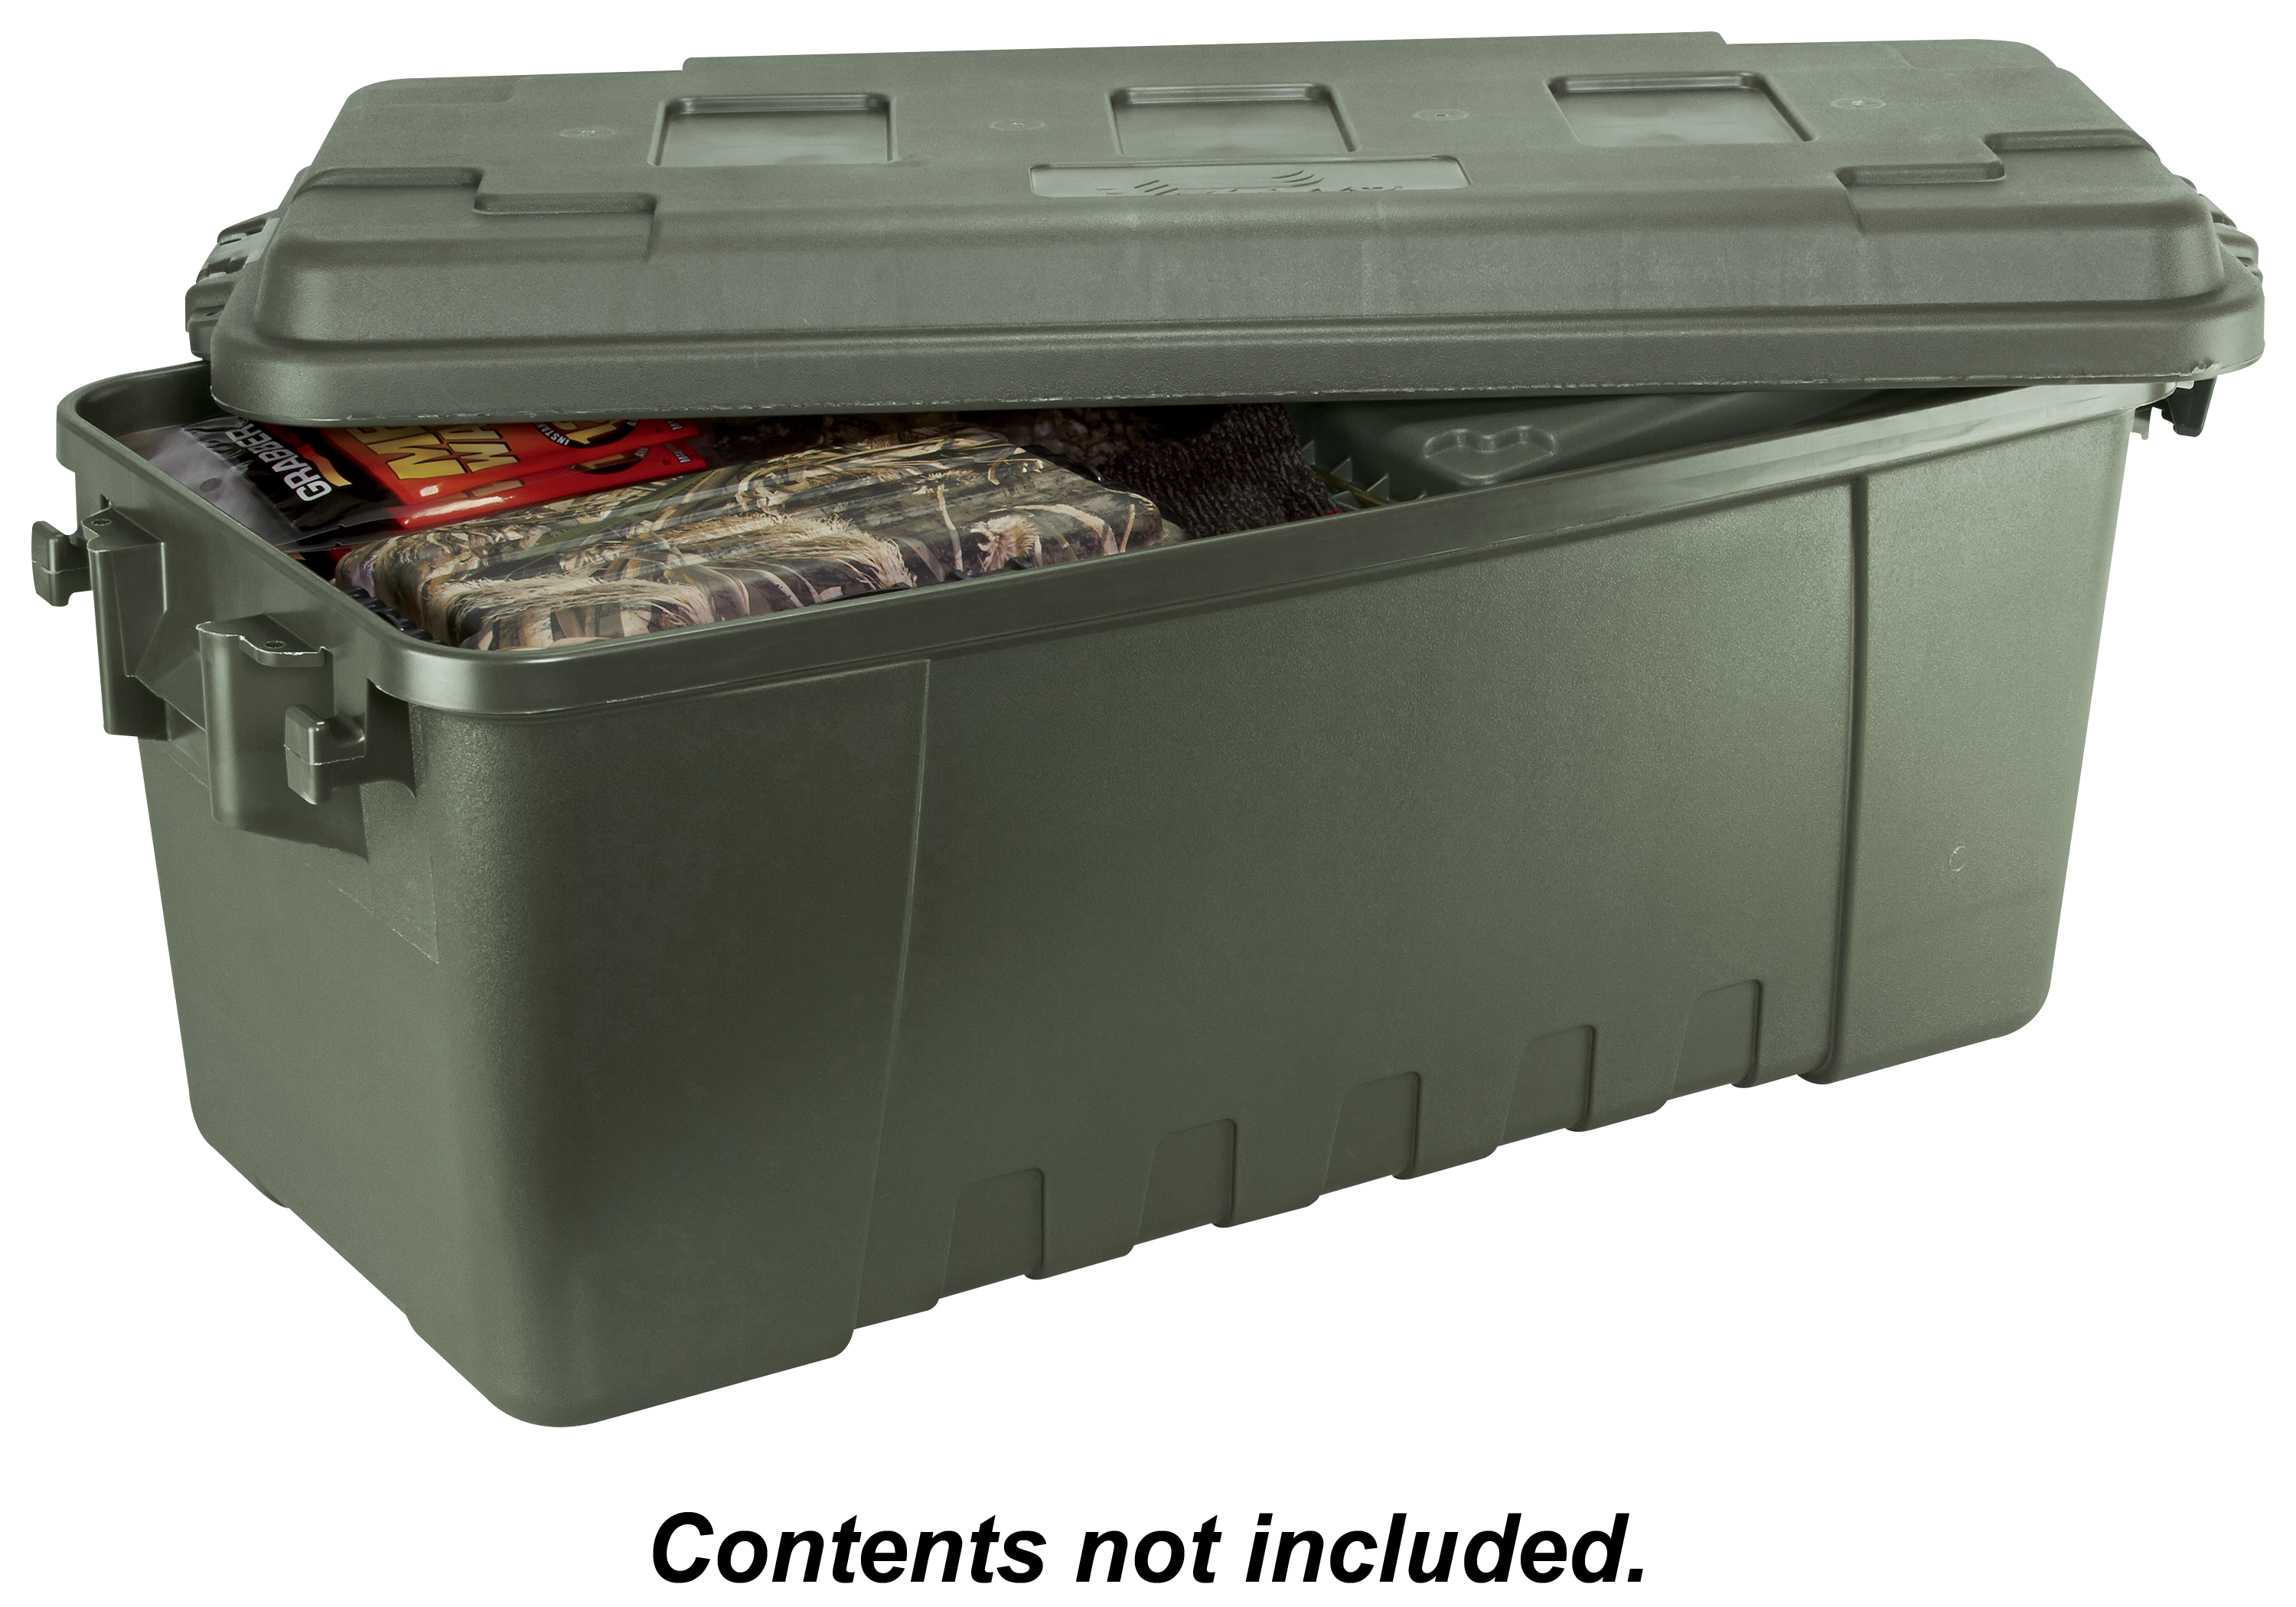 Plano Large Hinged Storage Box with Wheels Made in USA - OD Green